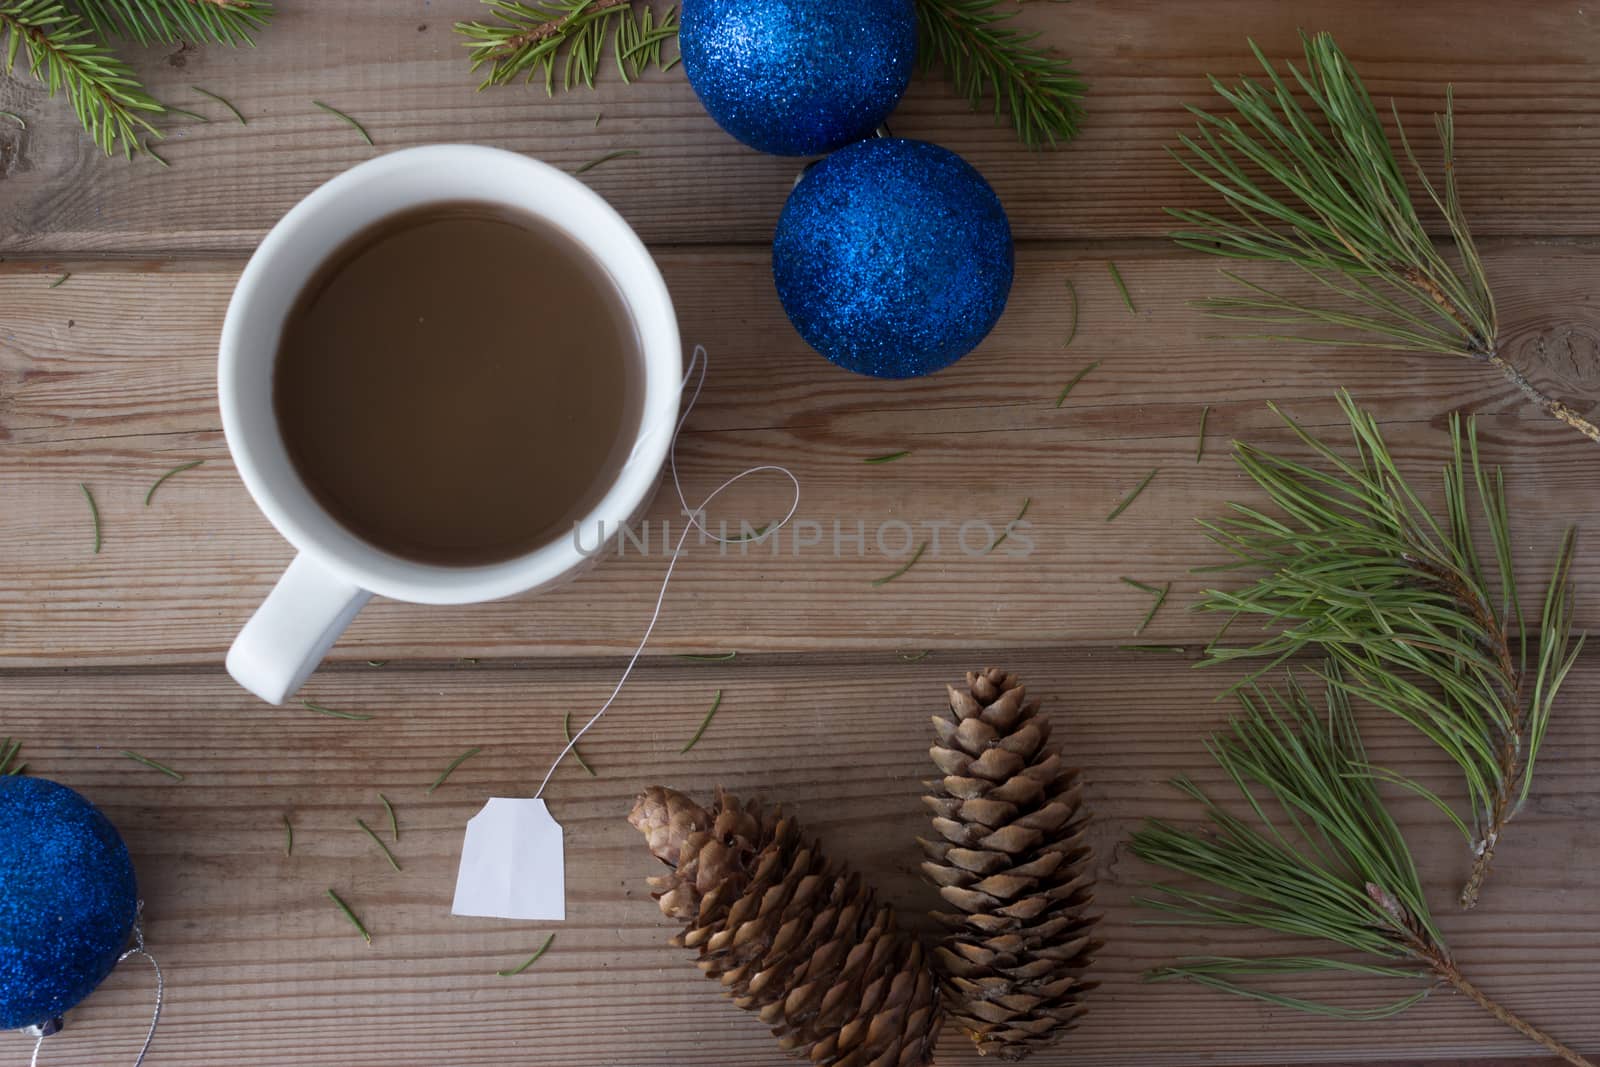 decorations, Christmas tree branches and cup of coffee